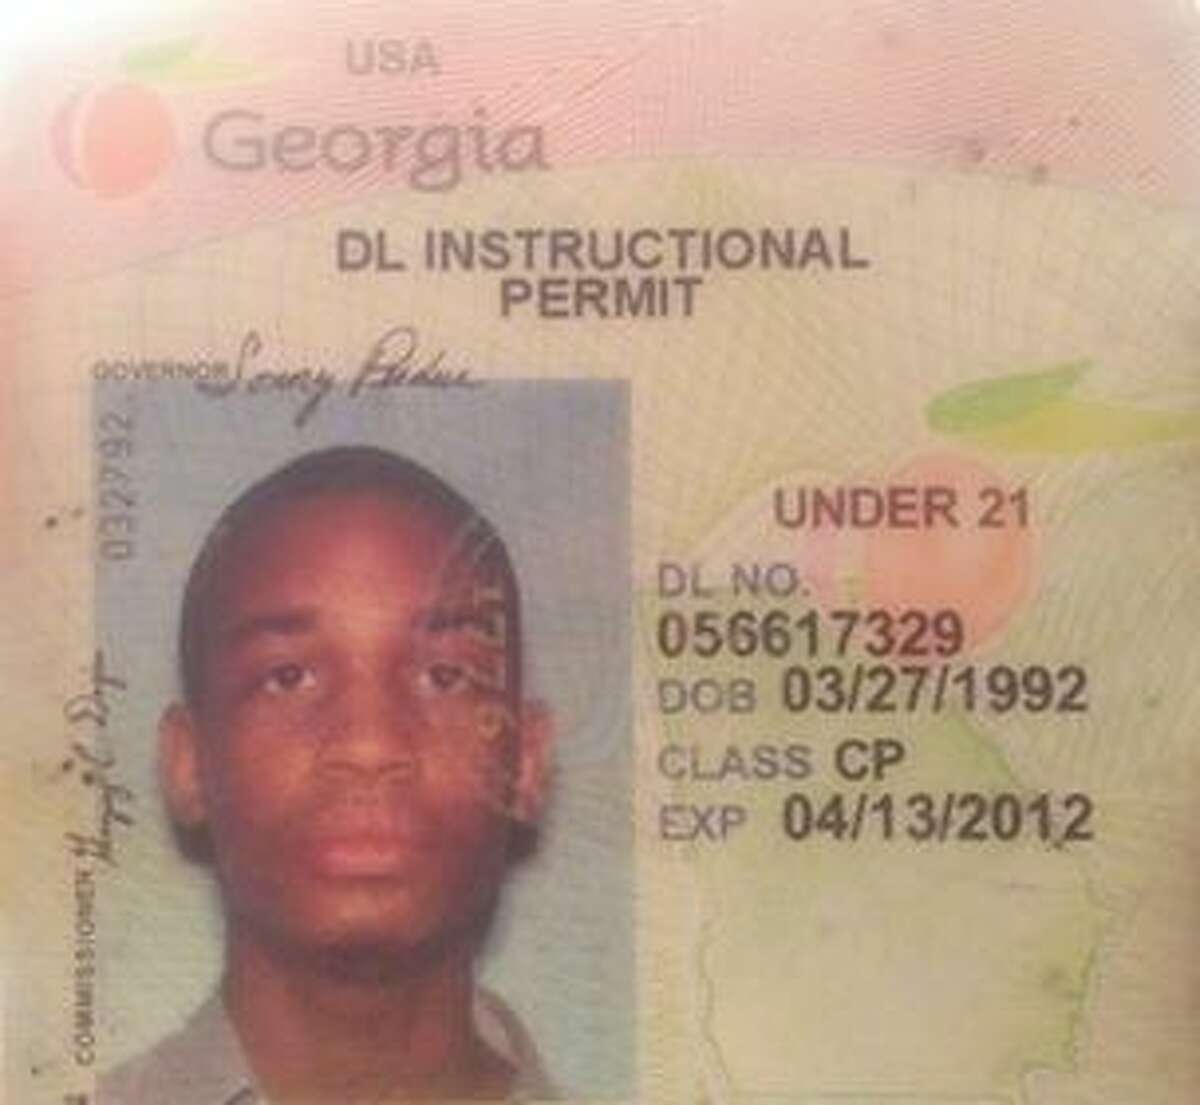 3. I lived in Atlanta for several stints between 2009 and 2011, which is where my father lives. That is also where I got my first learner's permit or photo ID of any kind. The Southern heat ...  ain't it, chief.